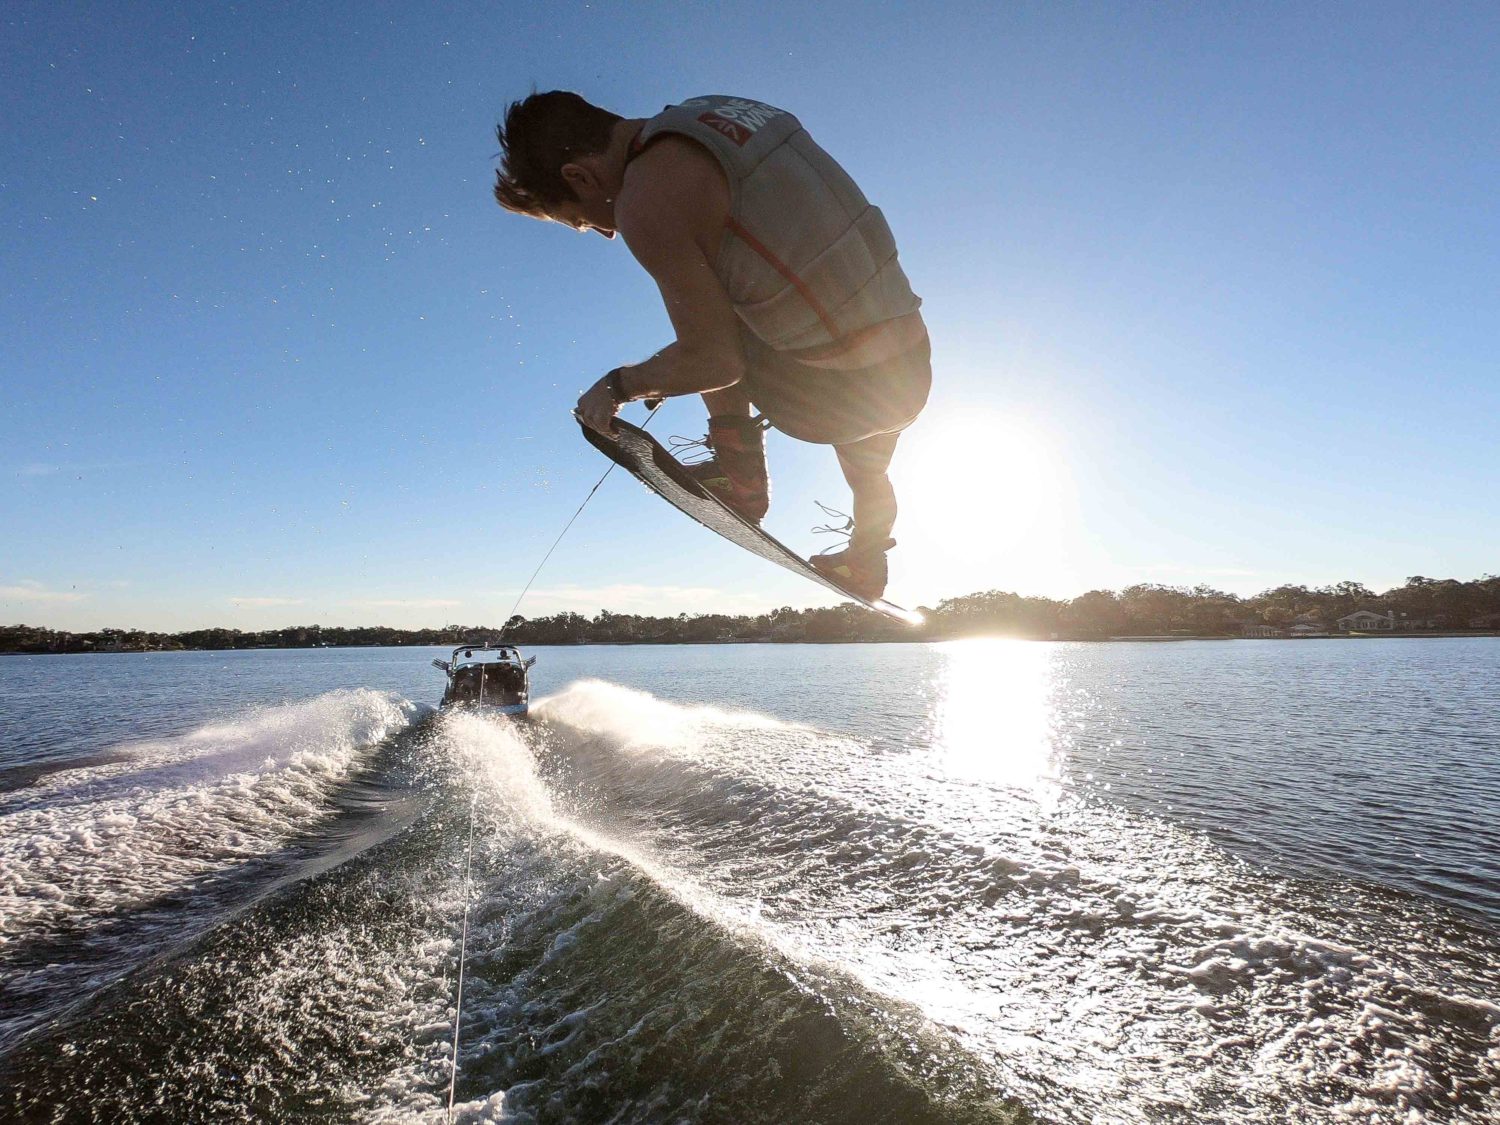 The Alliance Wake "Rider of the Year" Is...